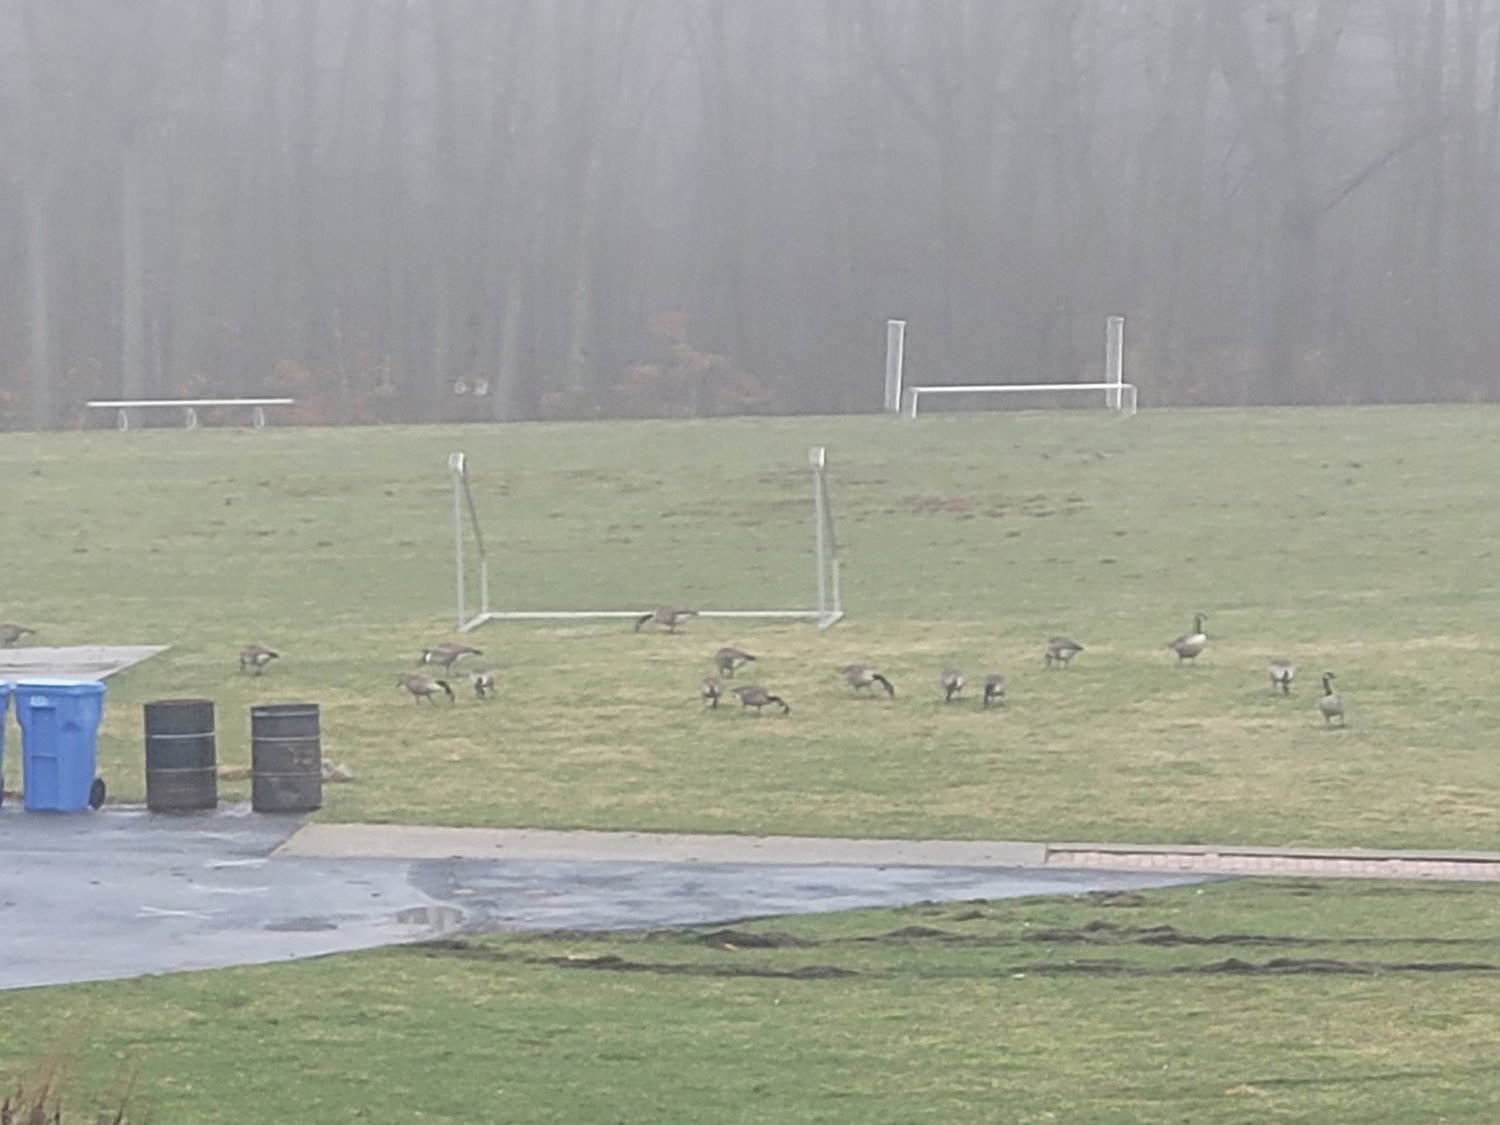 FLYING V ON THE SOCCER FIELD: Geese made use of Johnston's soccer fields during Saturday's announcement, inside the nearby Indoor Recreation Center, of federal funds to rebuild the complex, replacing grass with artificial turf.